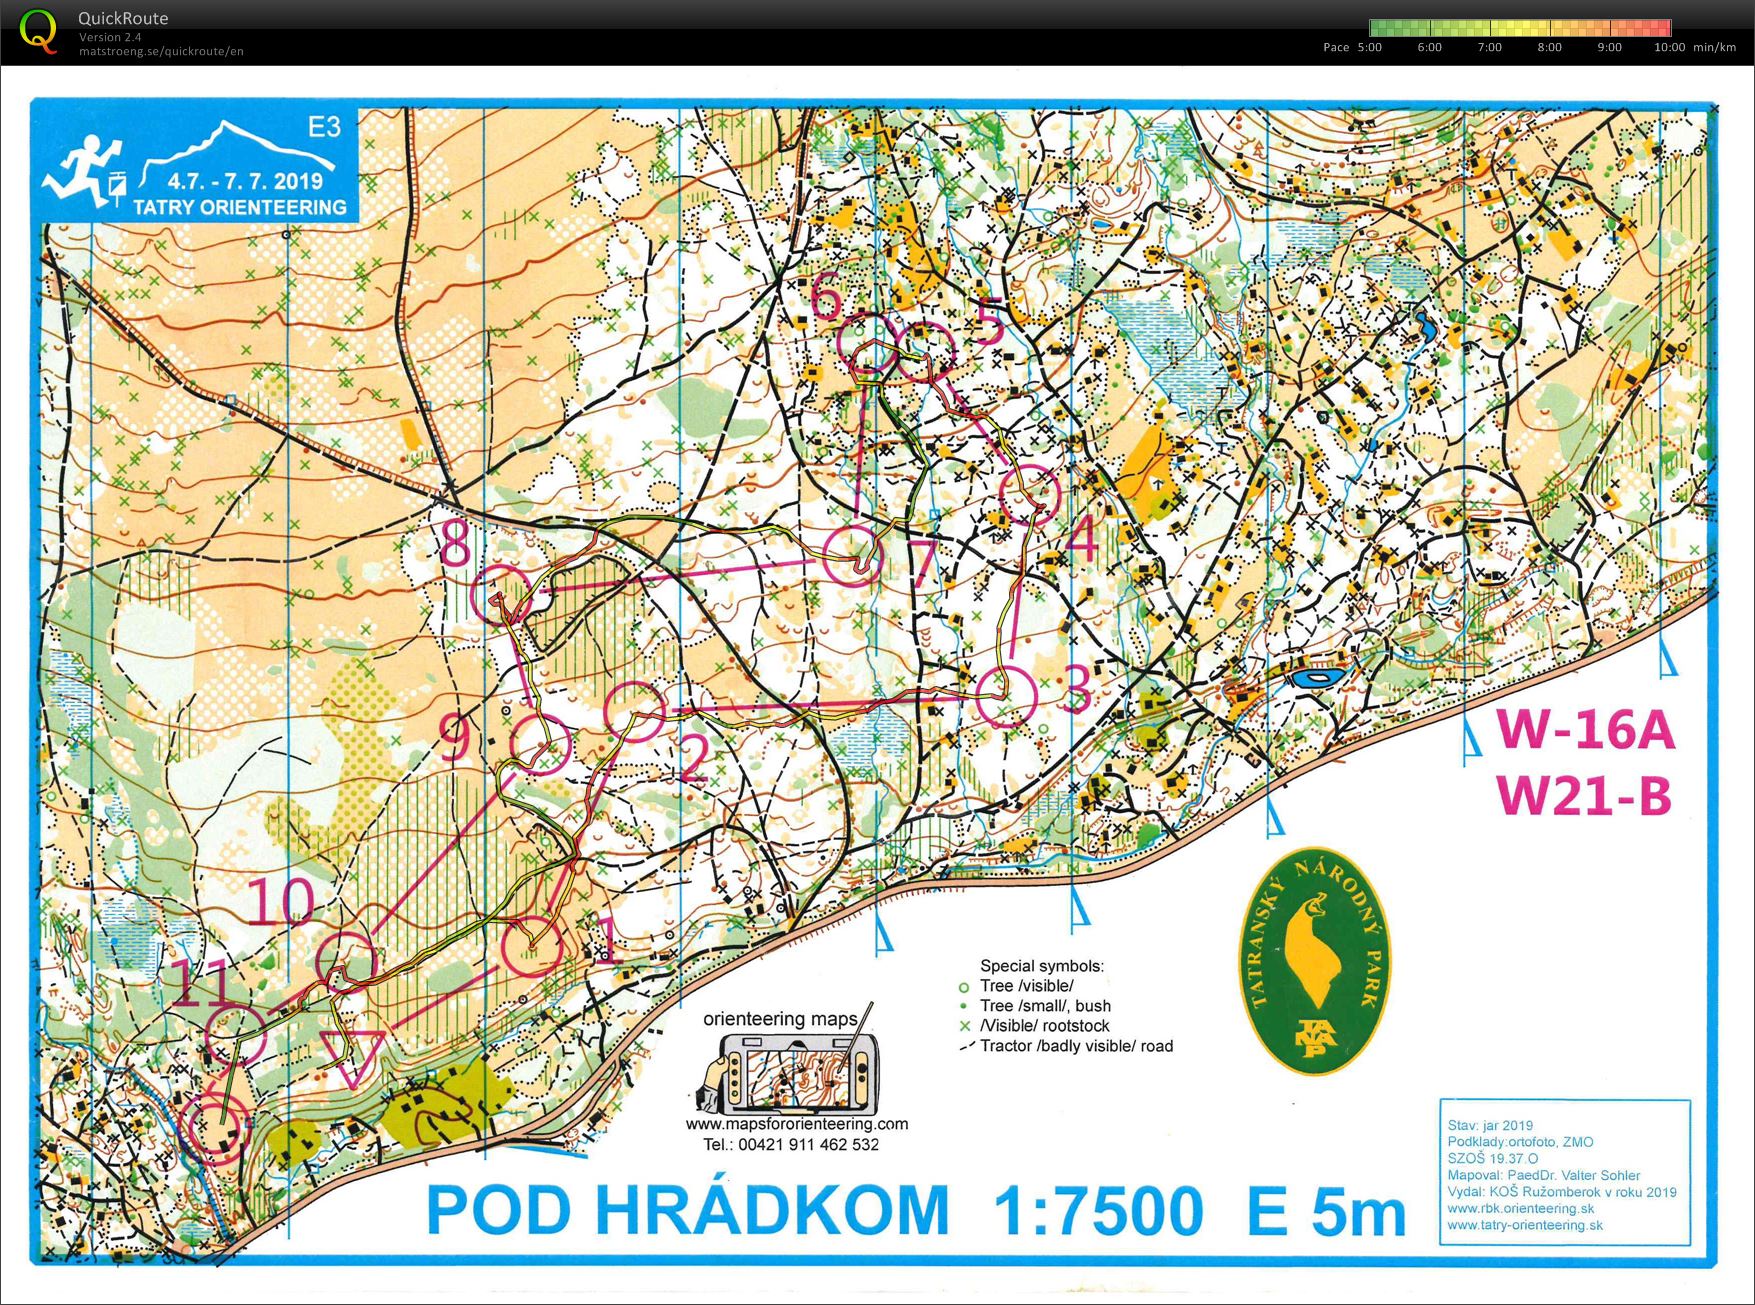 TATRY 5 days - E3 - D21B - middle (06.07.2019)